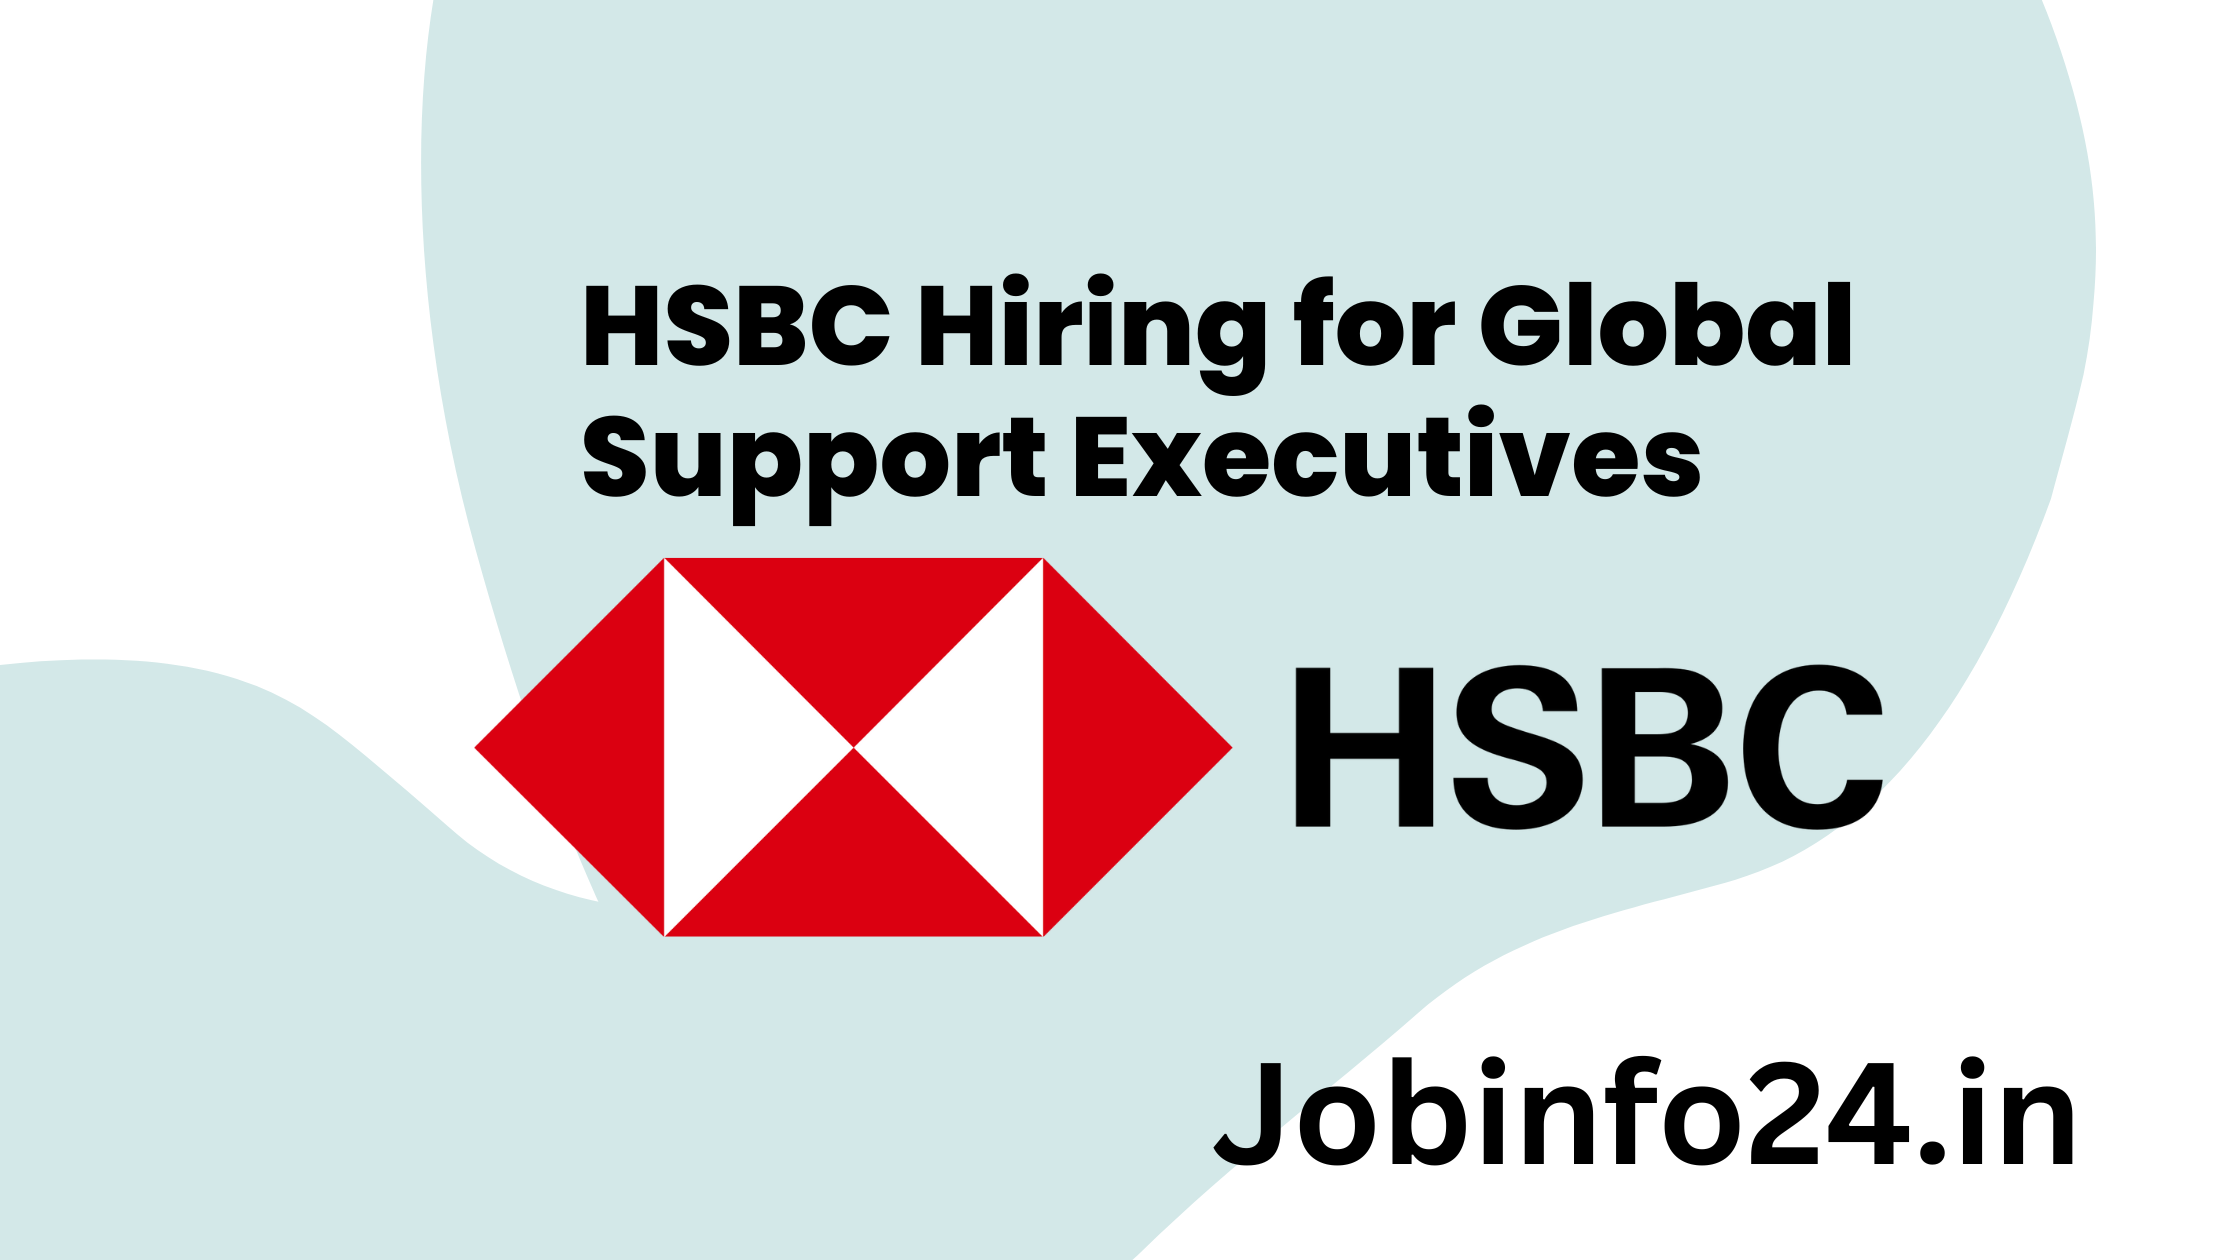 HSBC Hiring for Global Support Executives